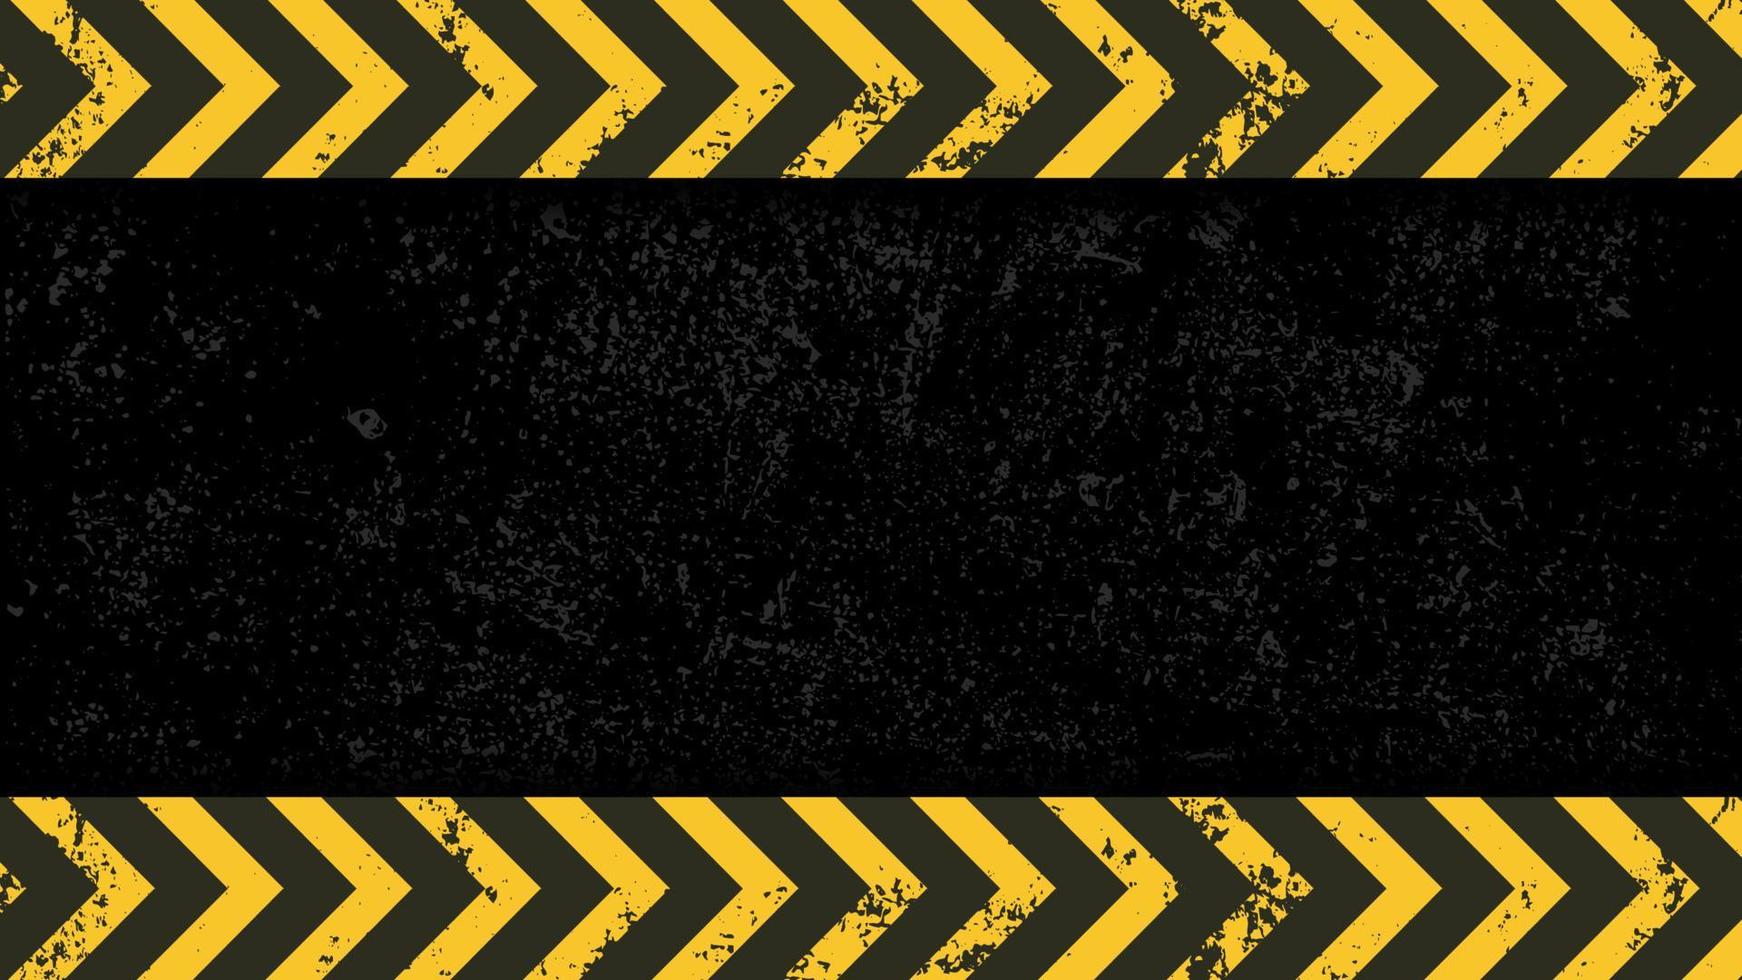 Abstract under construction background with black and yellow stripes vector ilustration